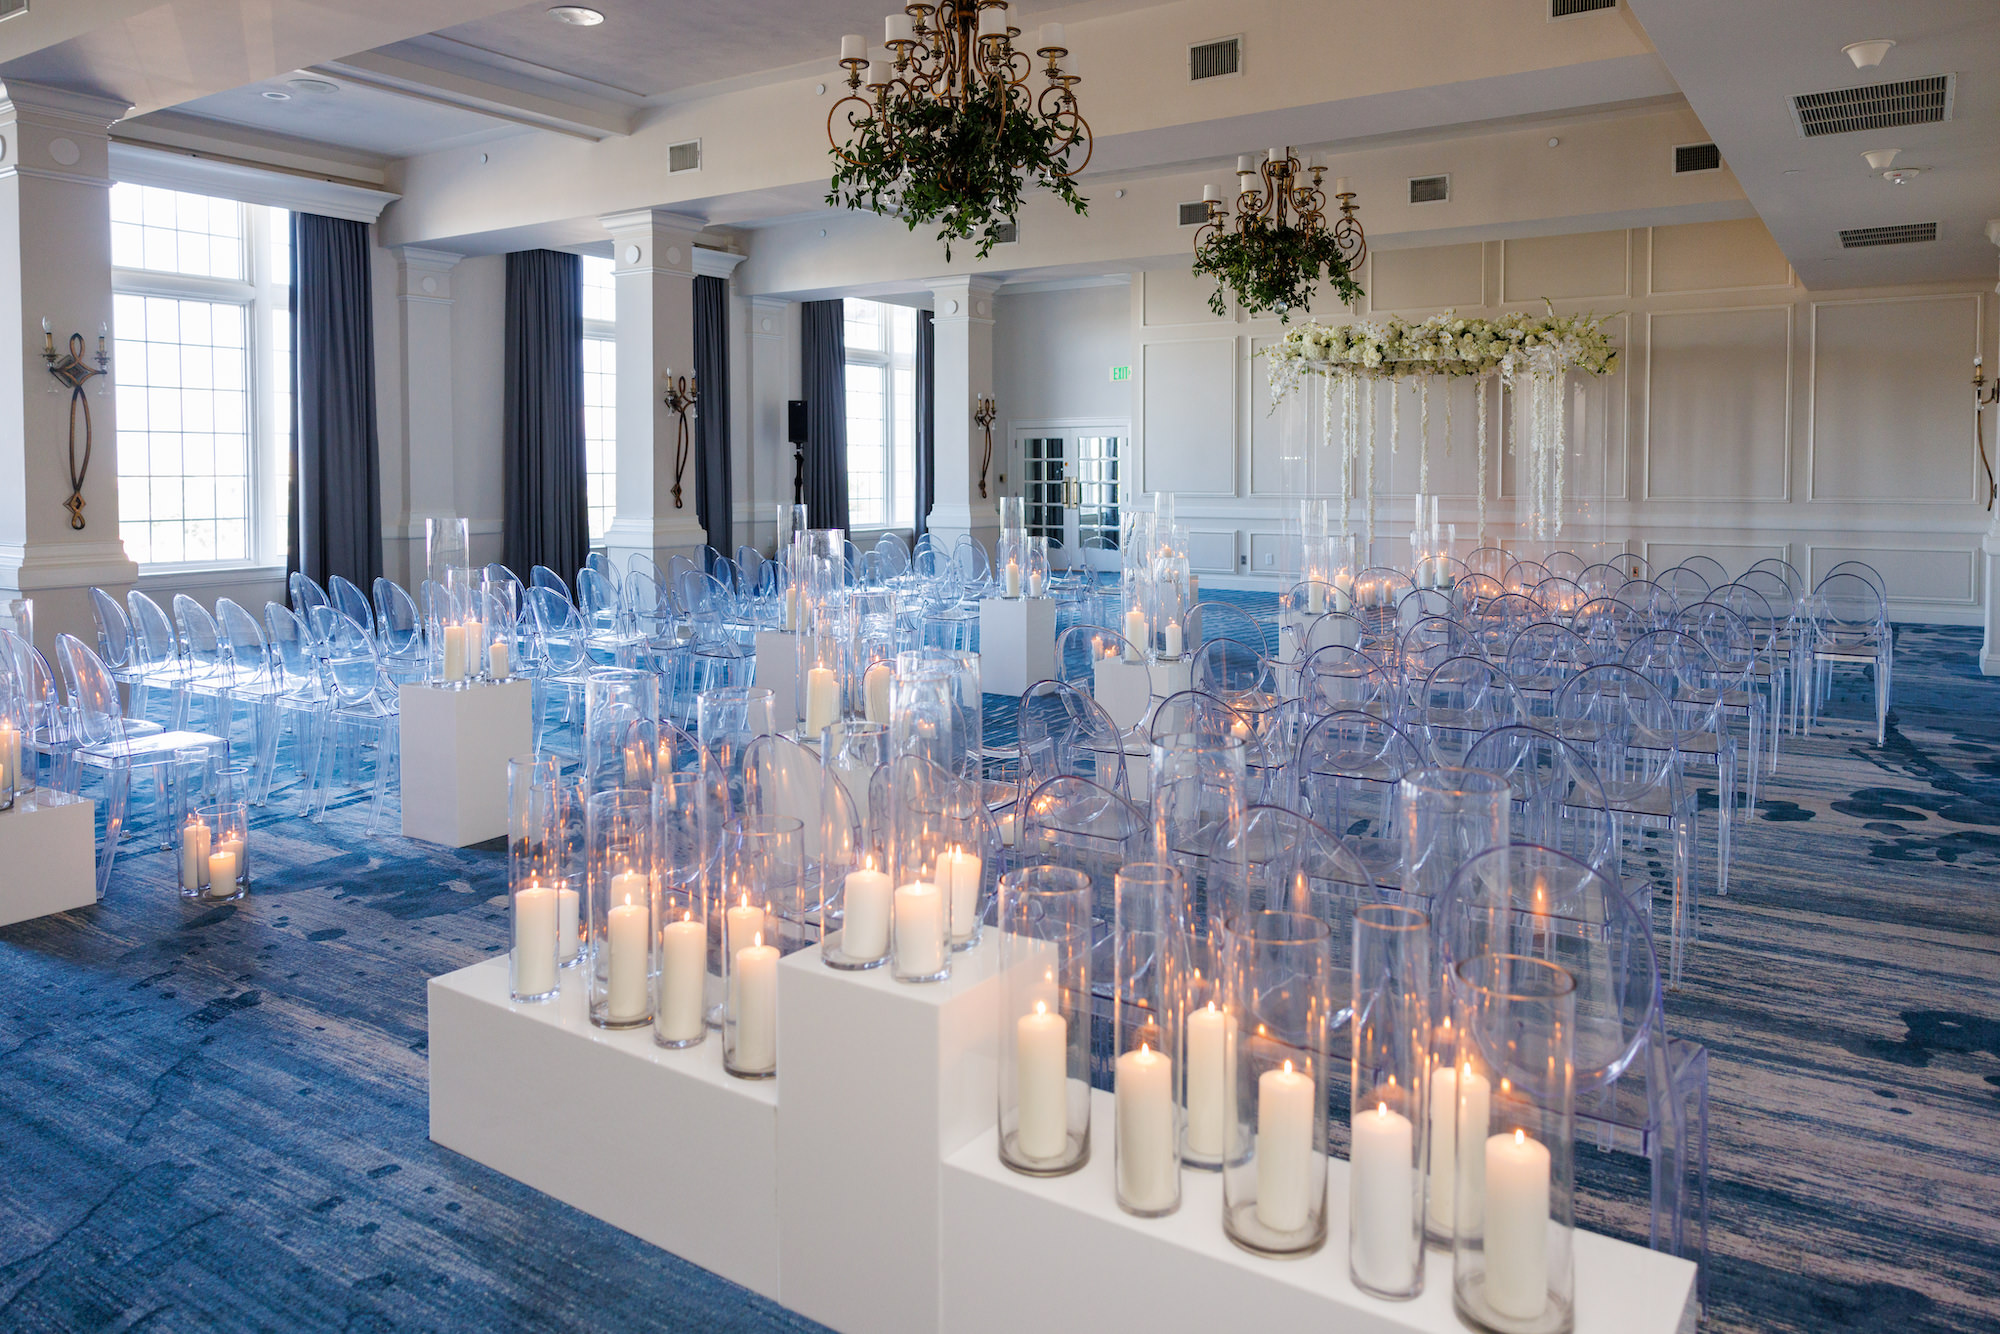 Modern Timeless Candlelit Wedding Aisle Ceremony Decor | White Pillar Candles | Ghost Acrylic Chairs Seating Inspiration | Buena Vista Ballroom Wedding Ceremony at St Pete Venue Don CeSar